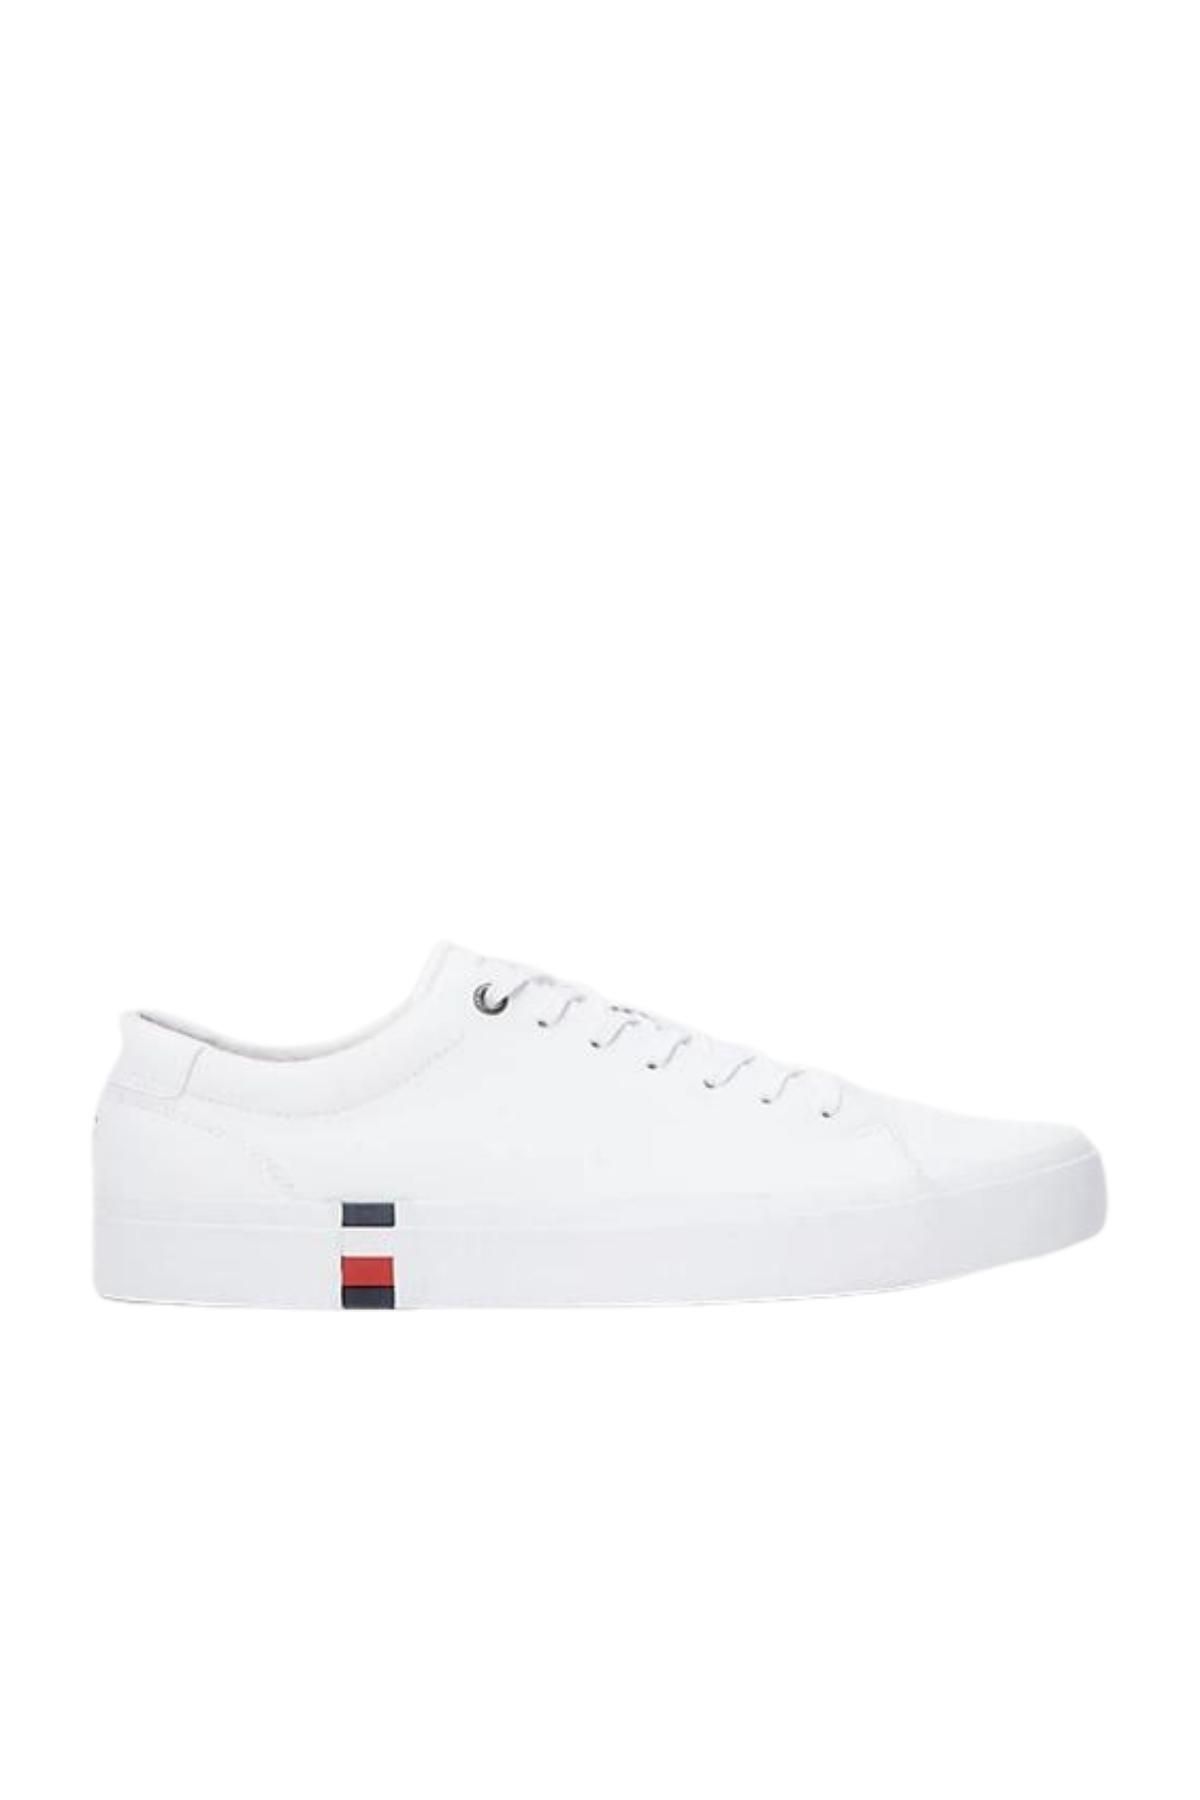 Tommy Hilfiger Corporate Leather Detail Vulc